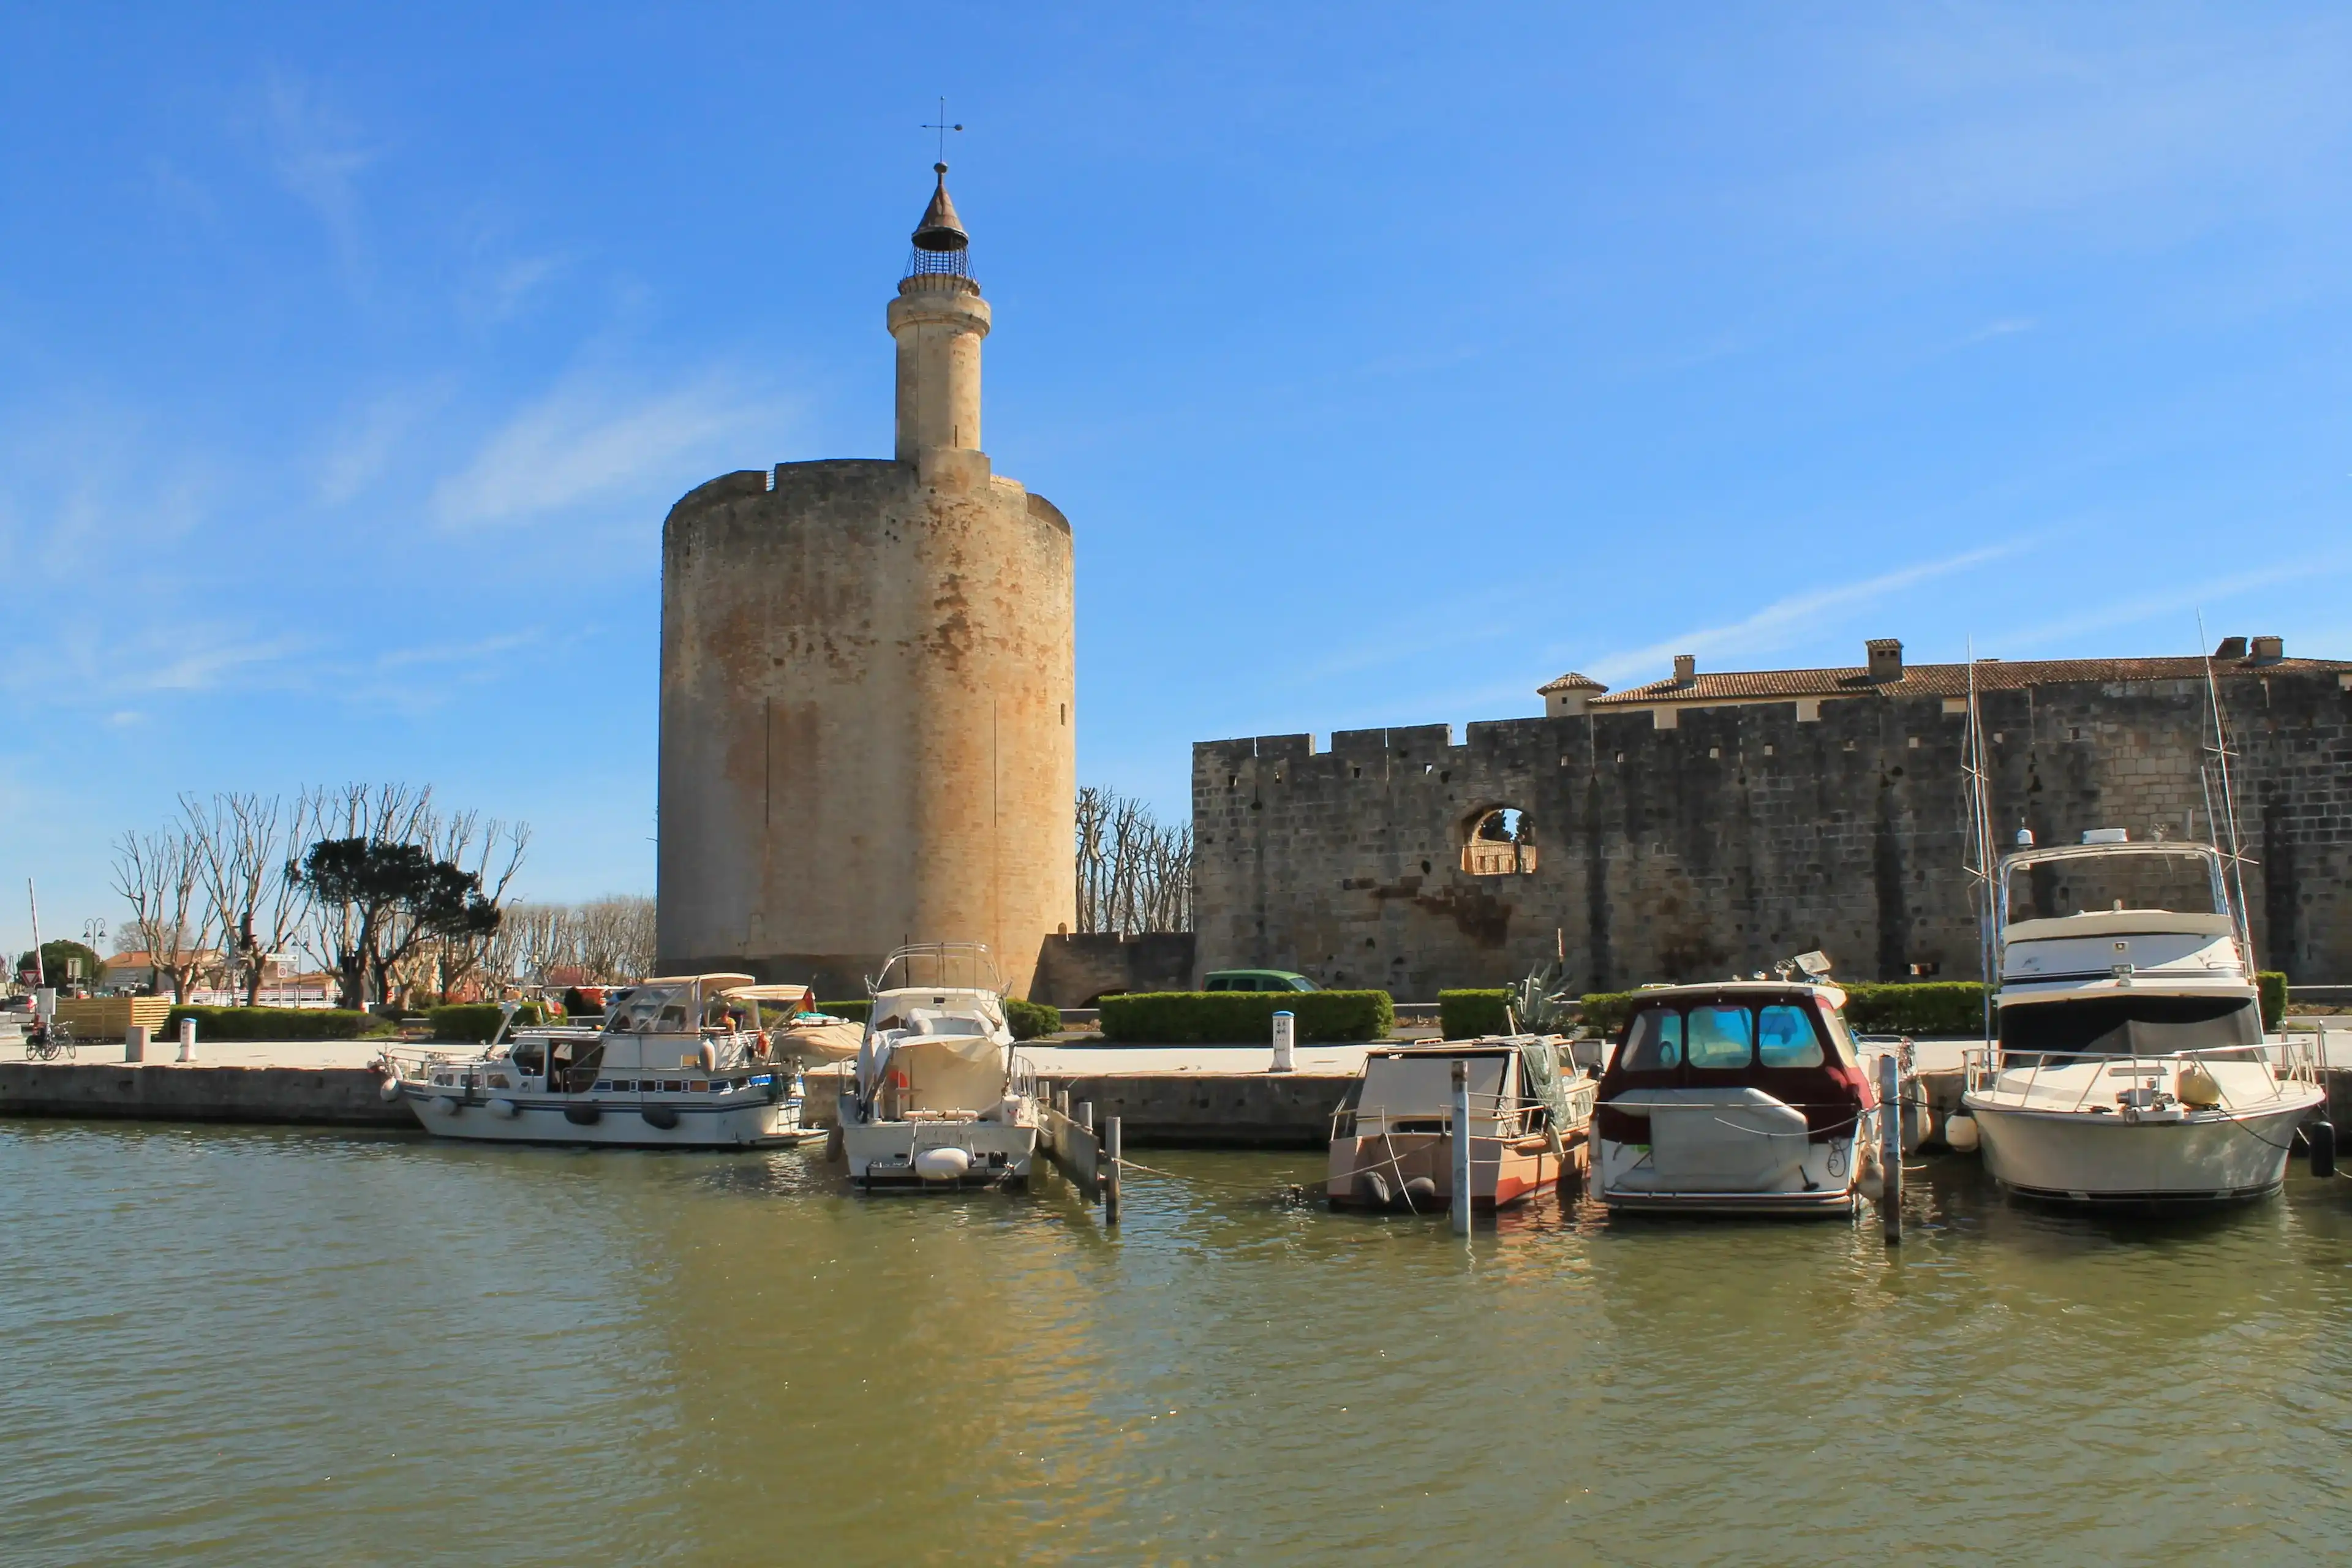  Best Aigues-Mortes hotels. Cheap hotels in Aigues-Mortes, France